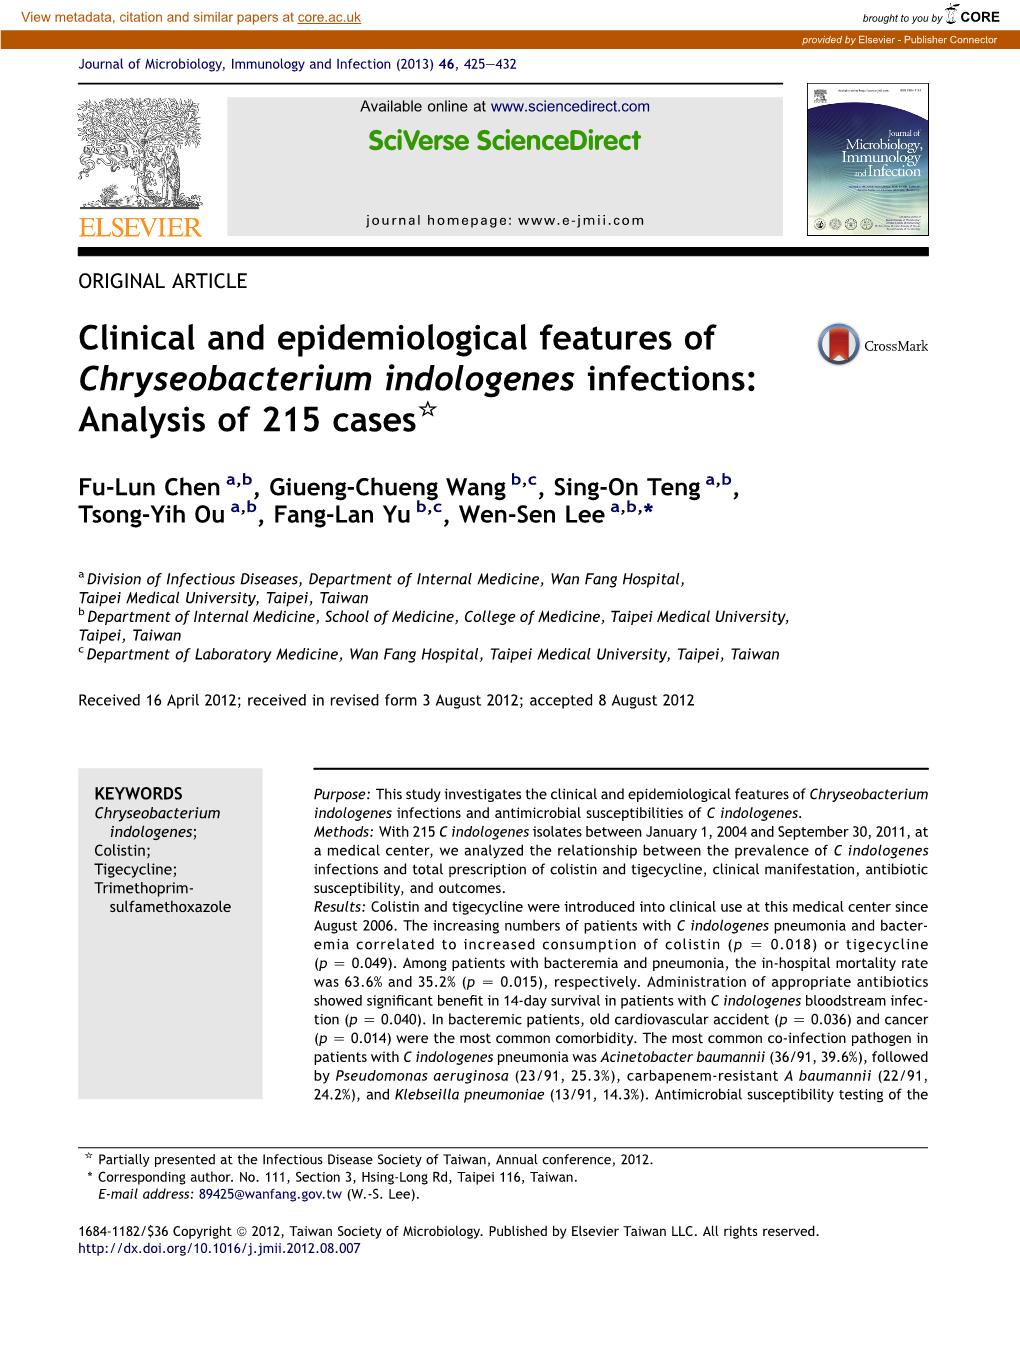 Clinical and Epidemiological Features of Chryseobacterium Indologenes Infections: Analysis of 215 Cases*